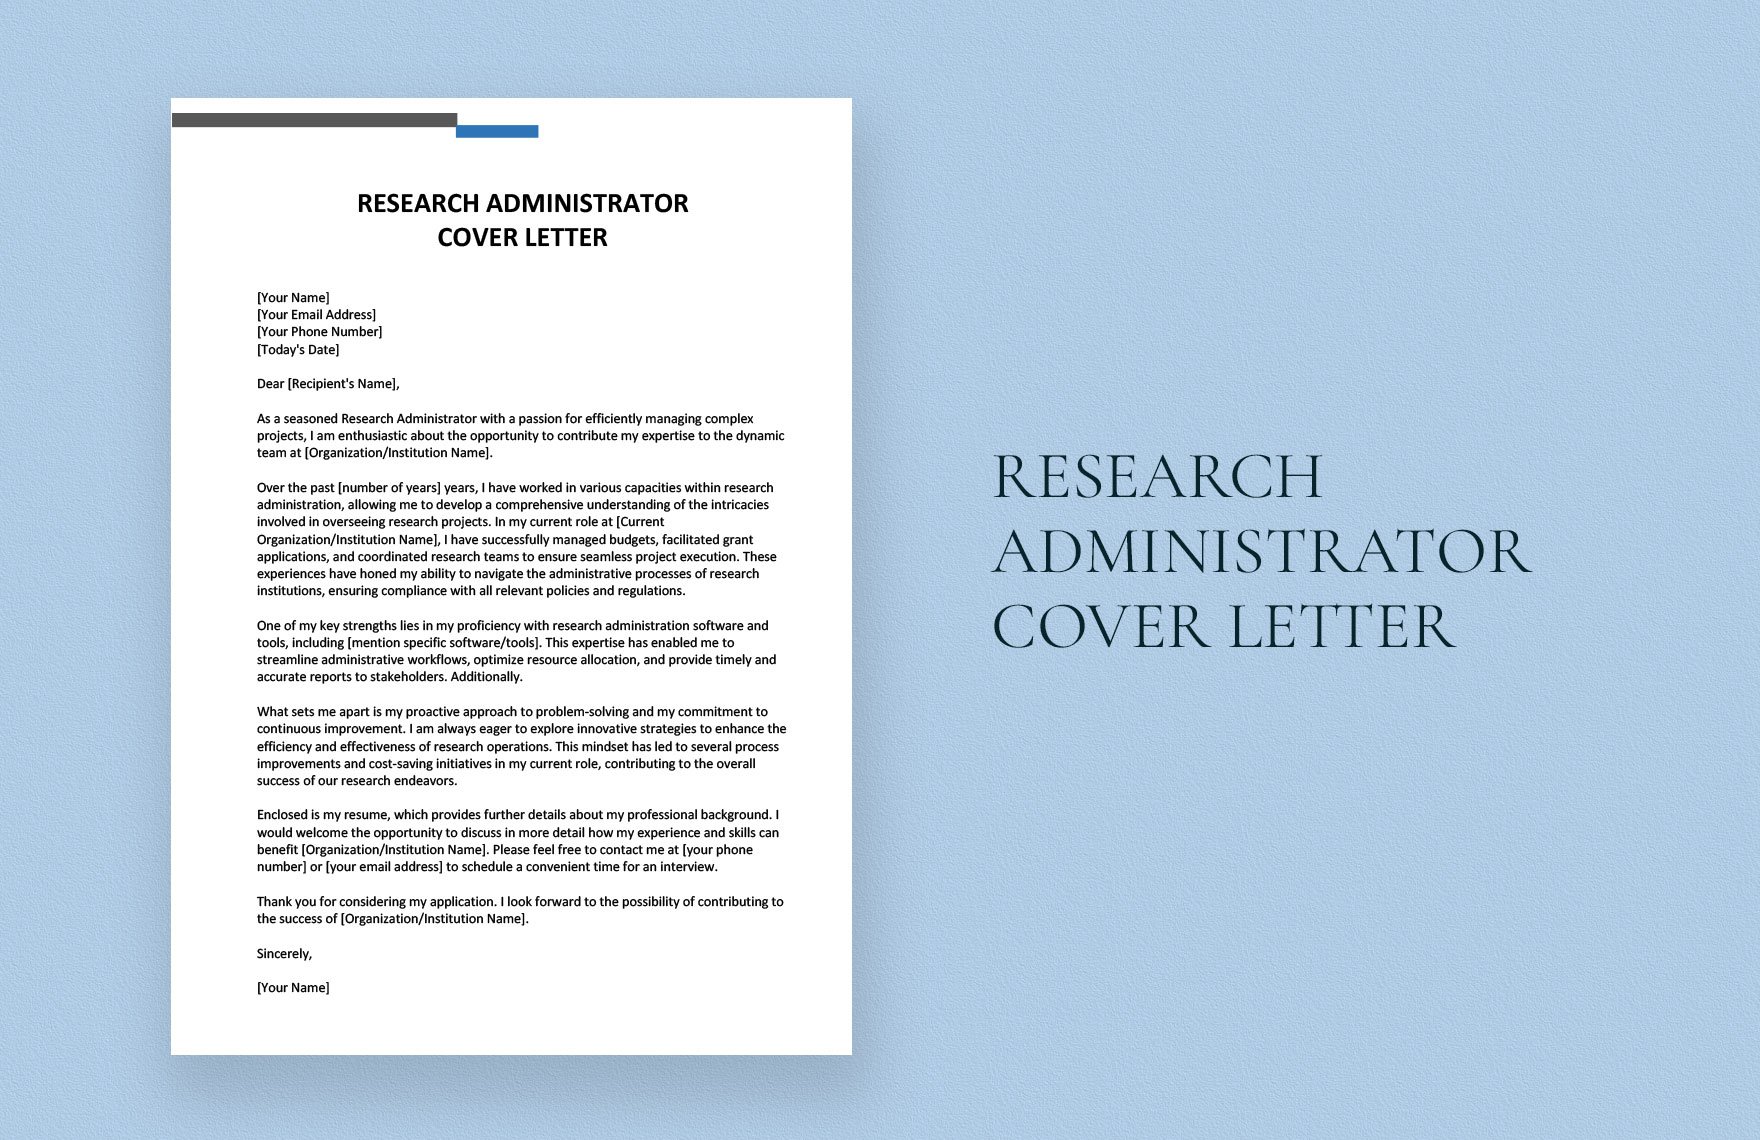 research-administrator-cover-letter